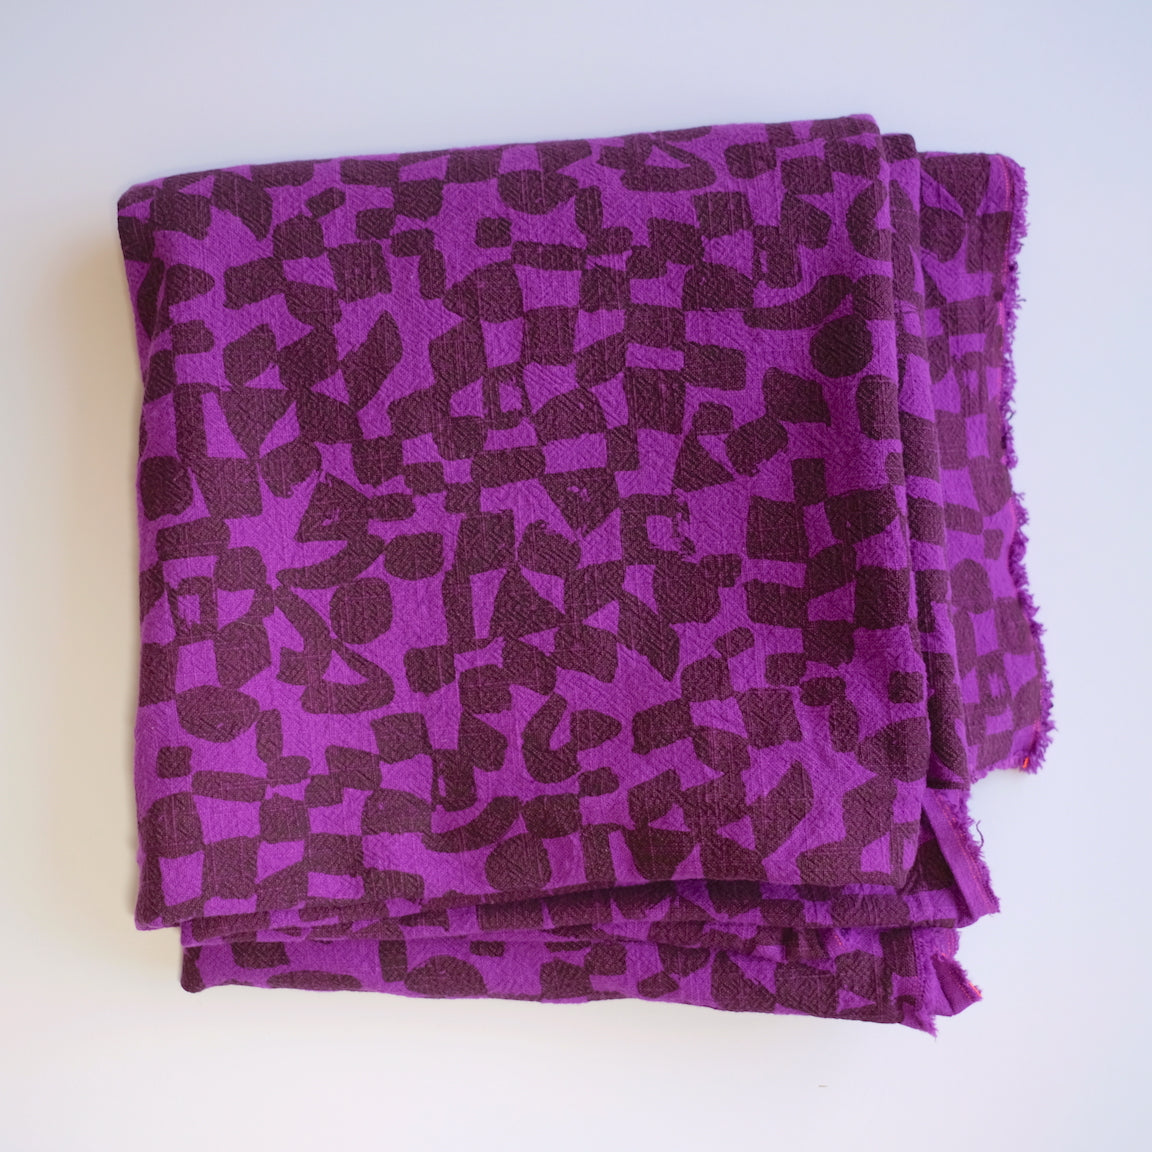 Overdyed fabric by the yard - Checks - Lentil - Violet